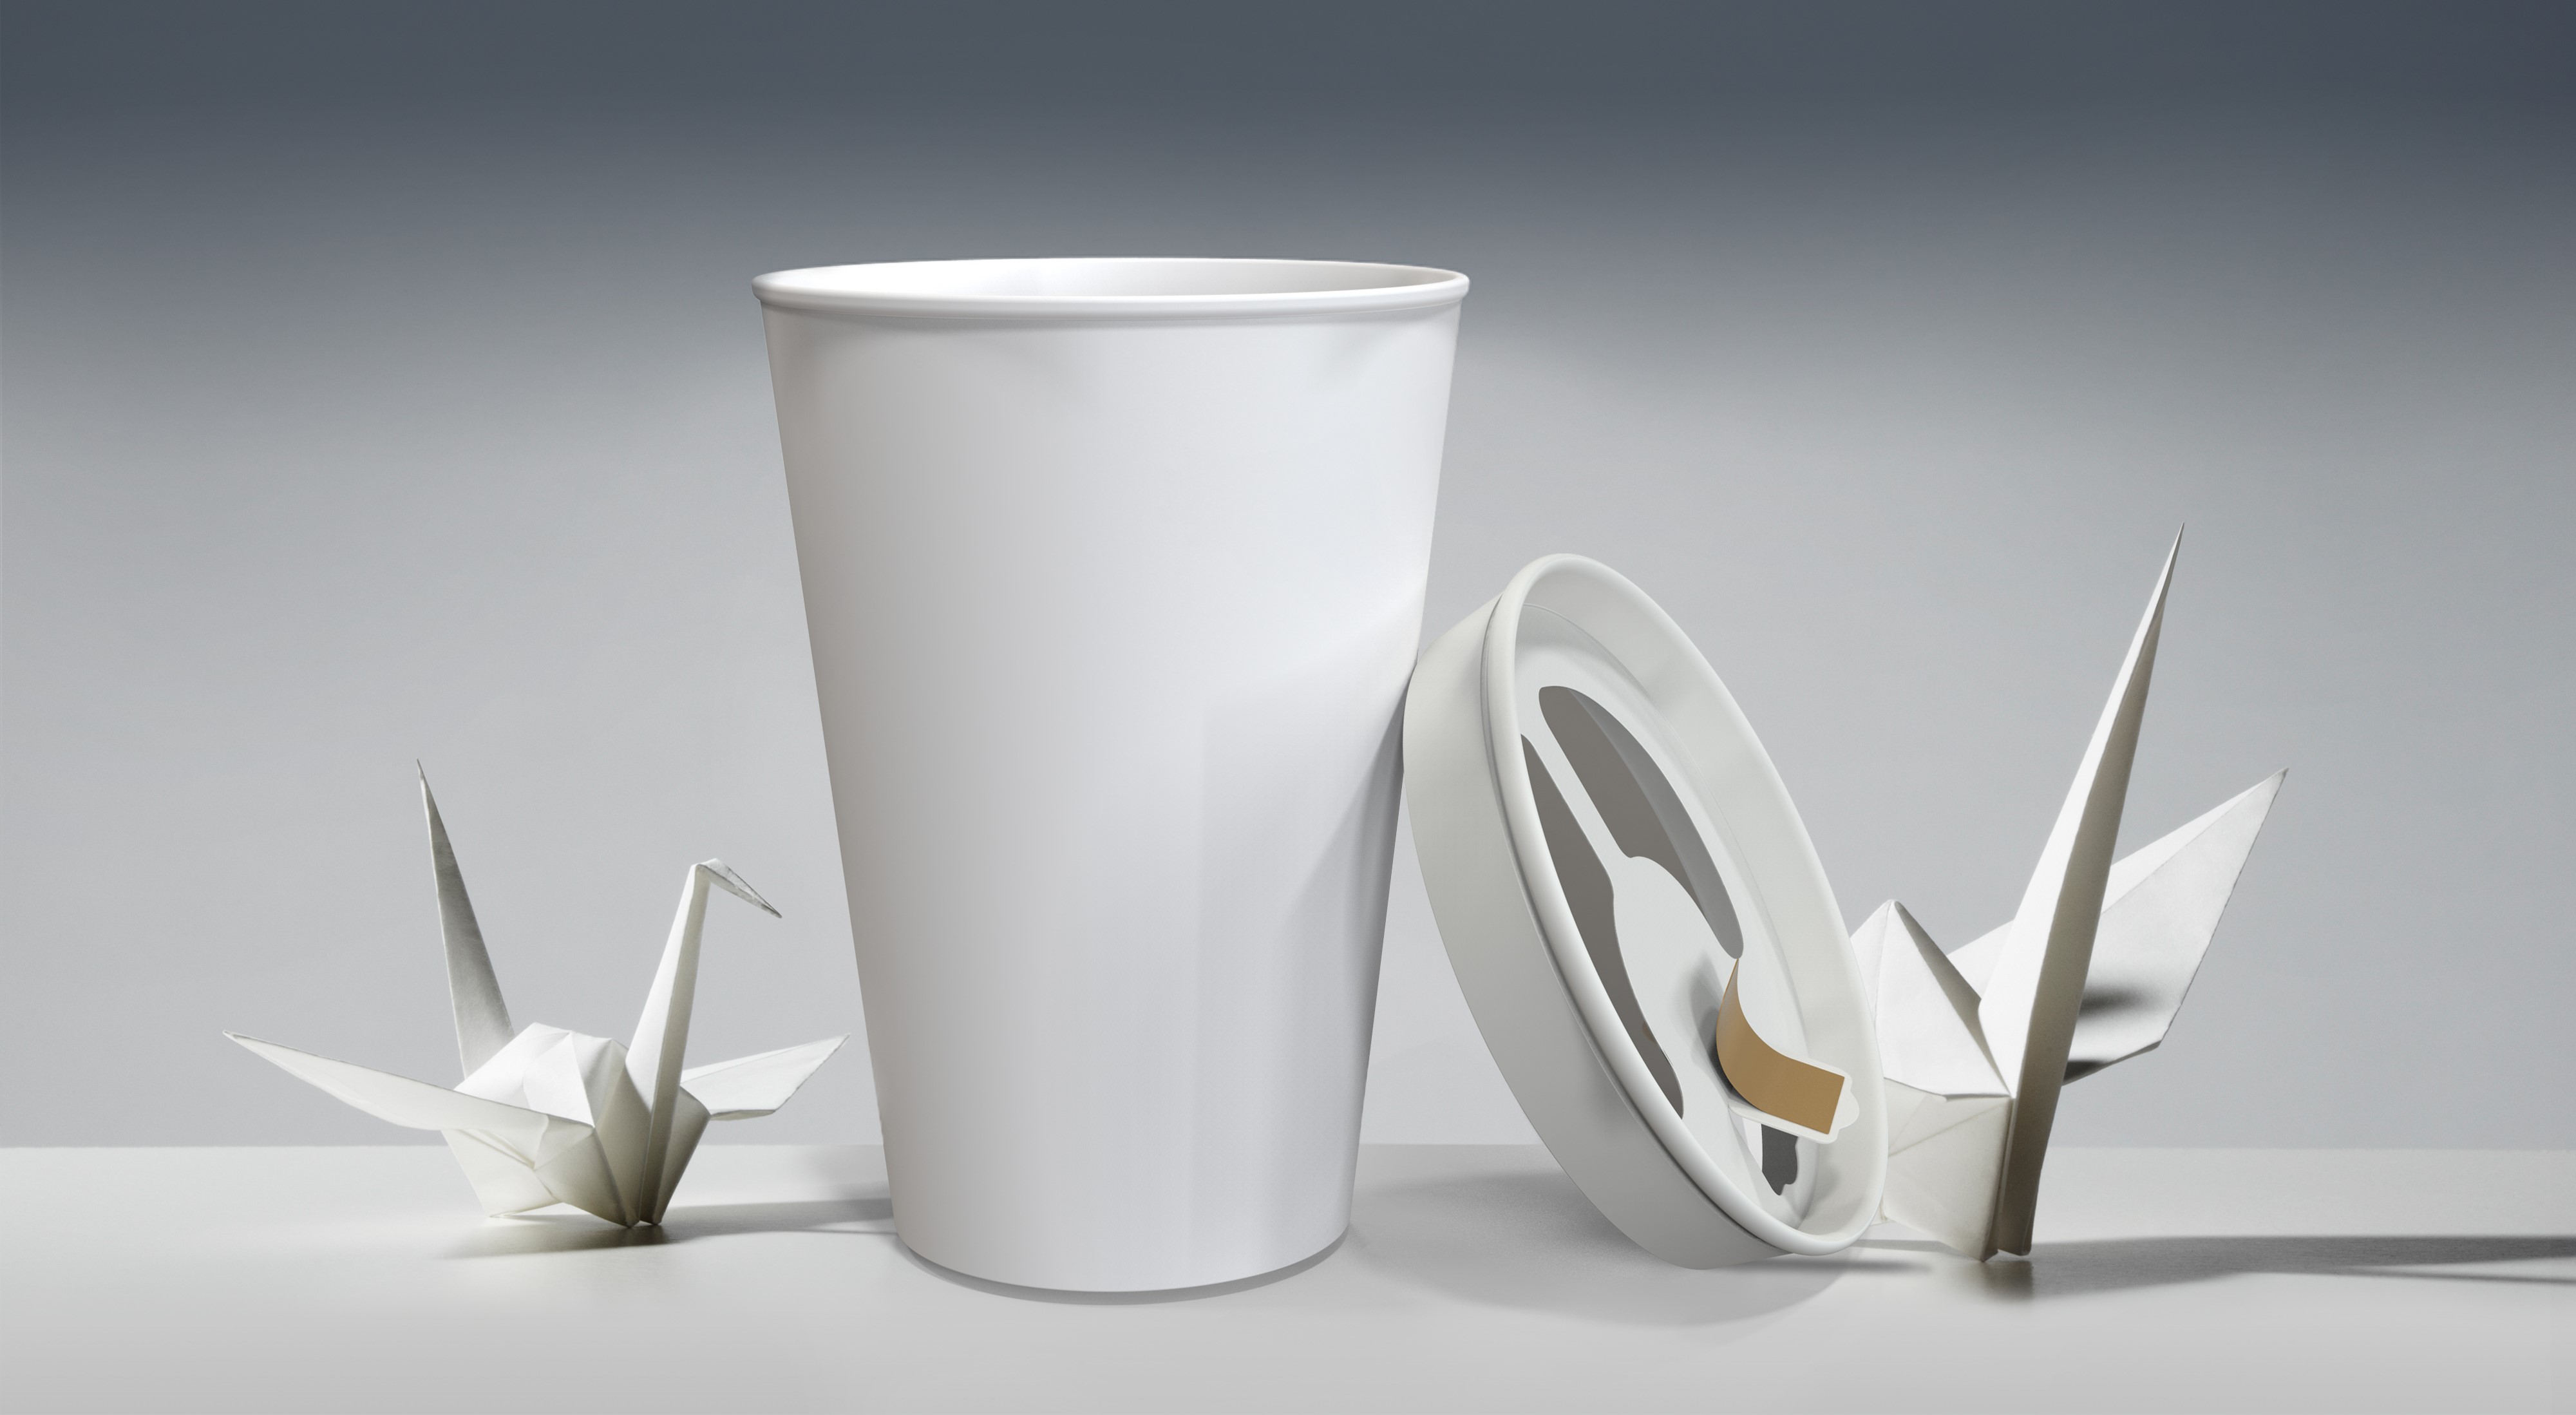 The world's first Eco-friendly paper coffee cup lid was born